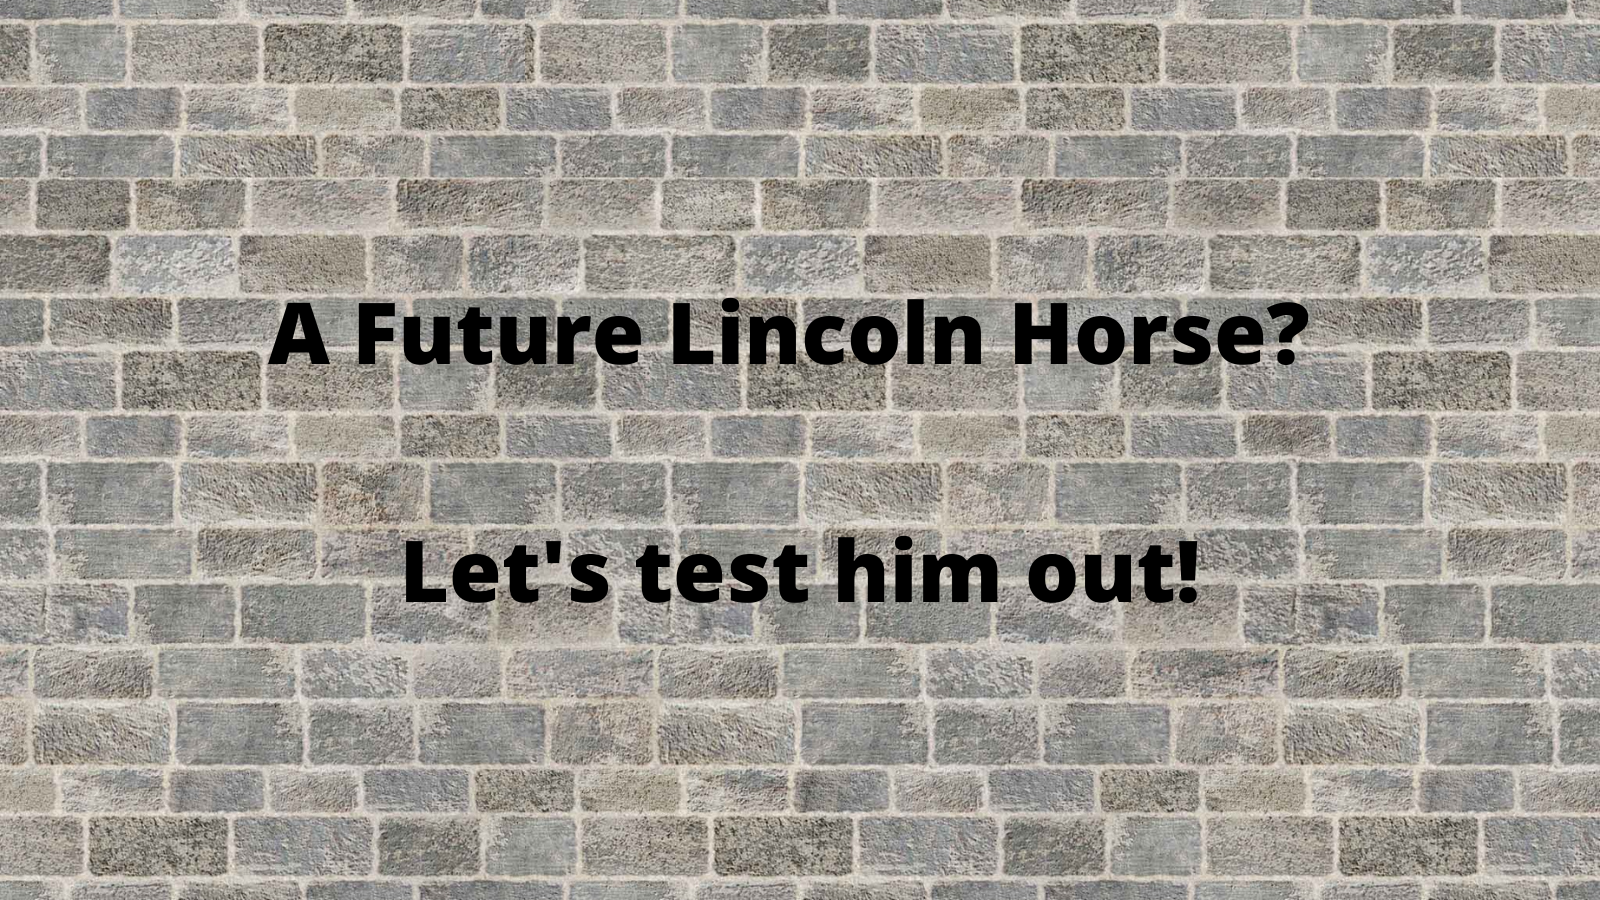 Could he be a future Lincoln Horse?